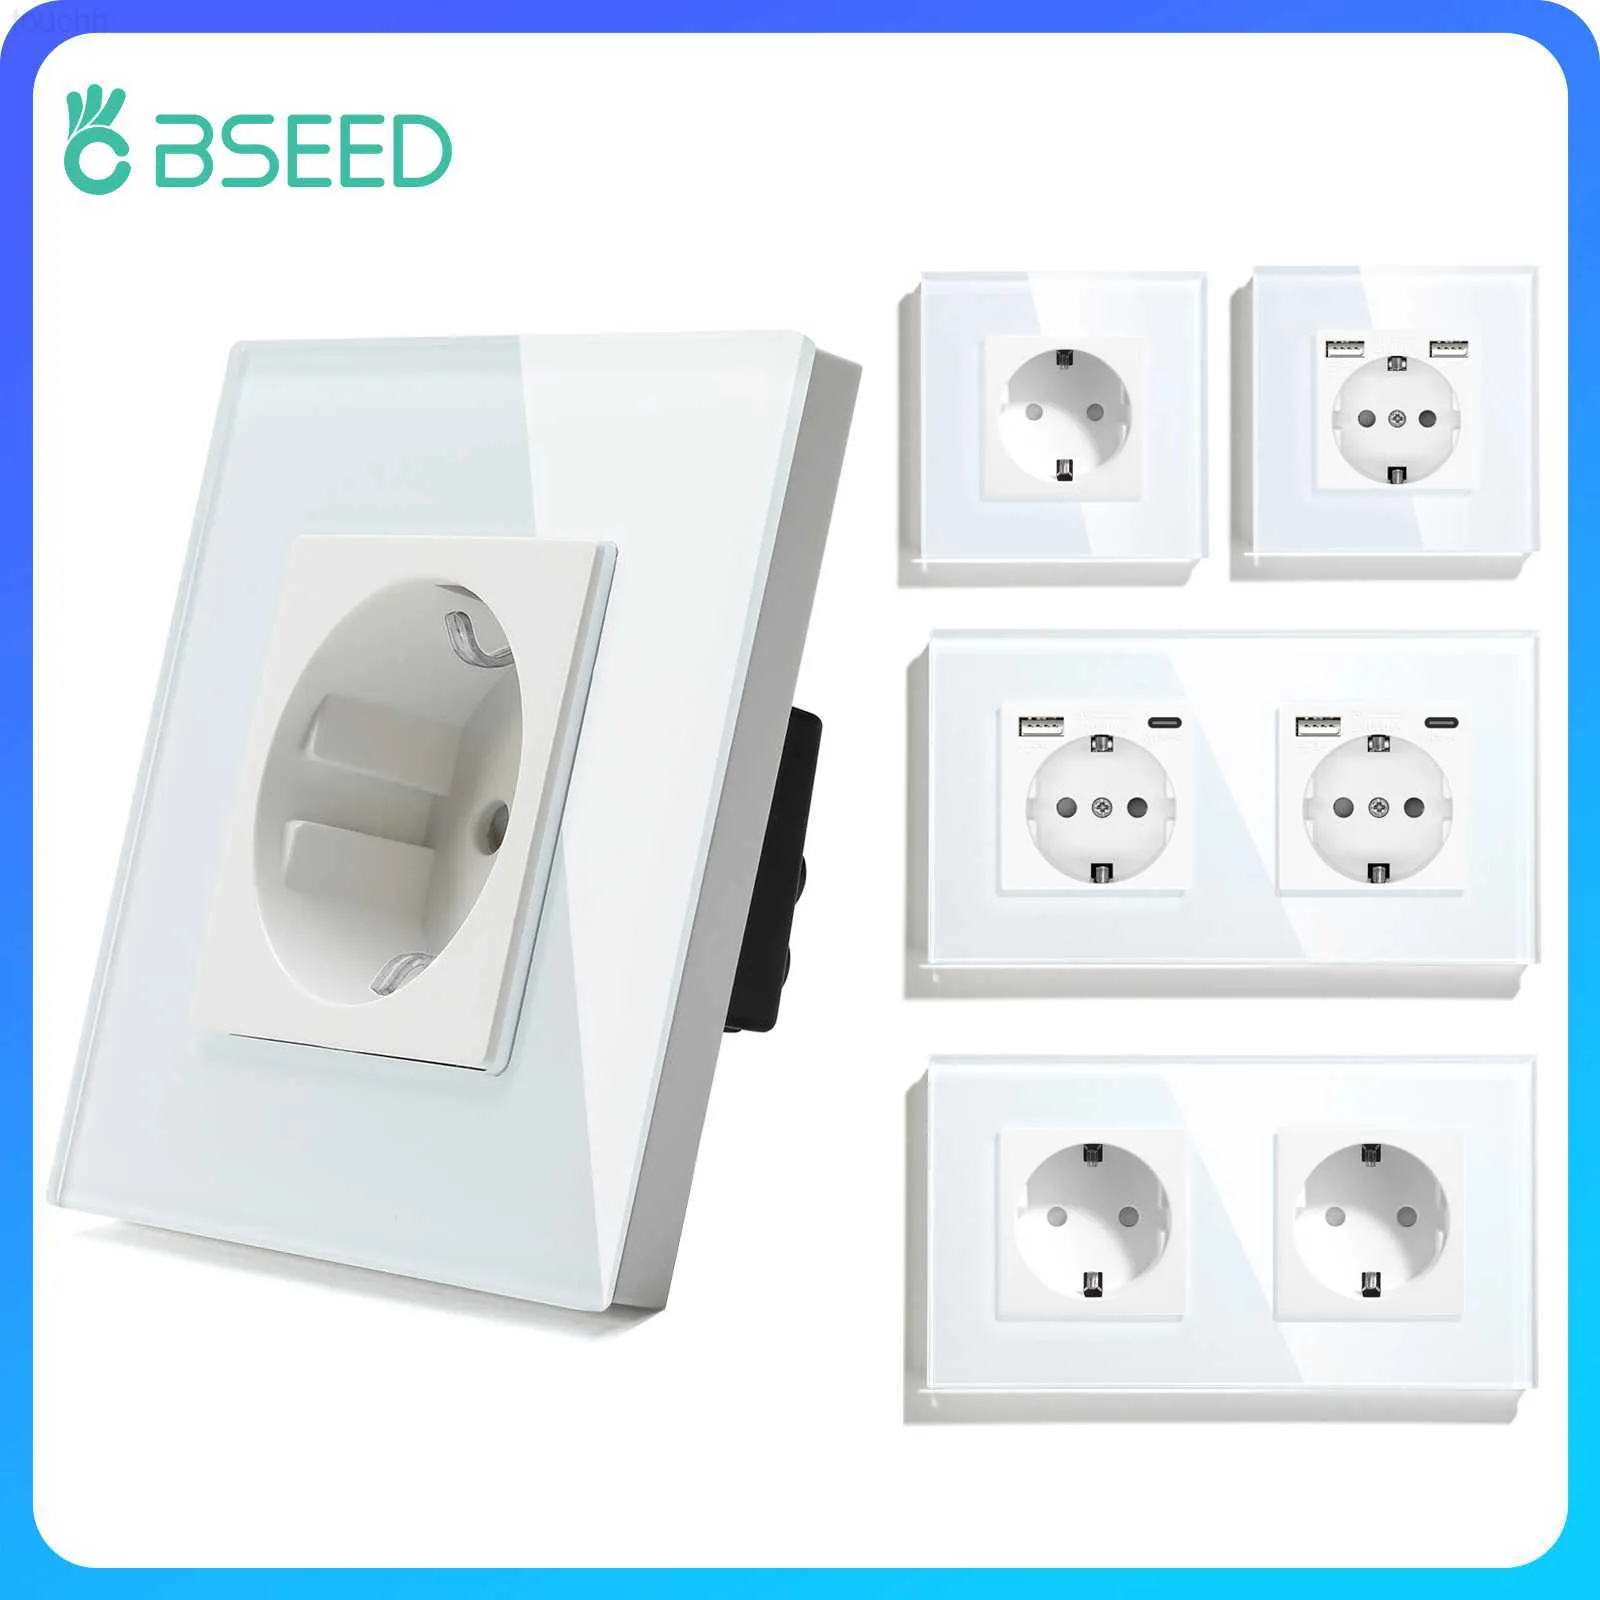 Sockets BSEED EU Wall Socket With USB Double Glass Sockets Triple Electric Sockets Type-C Fast Charging Ports Power Outlet 16A White L230921